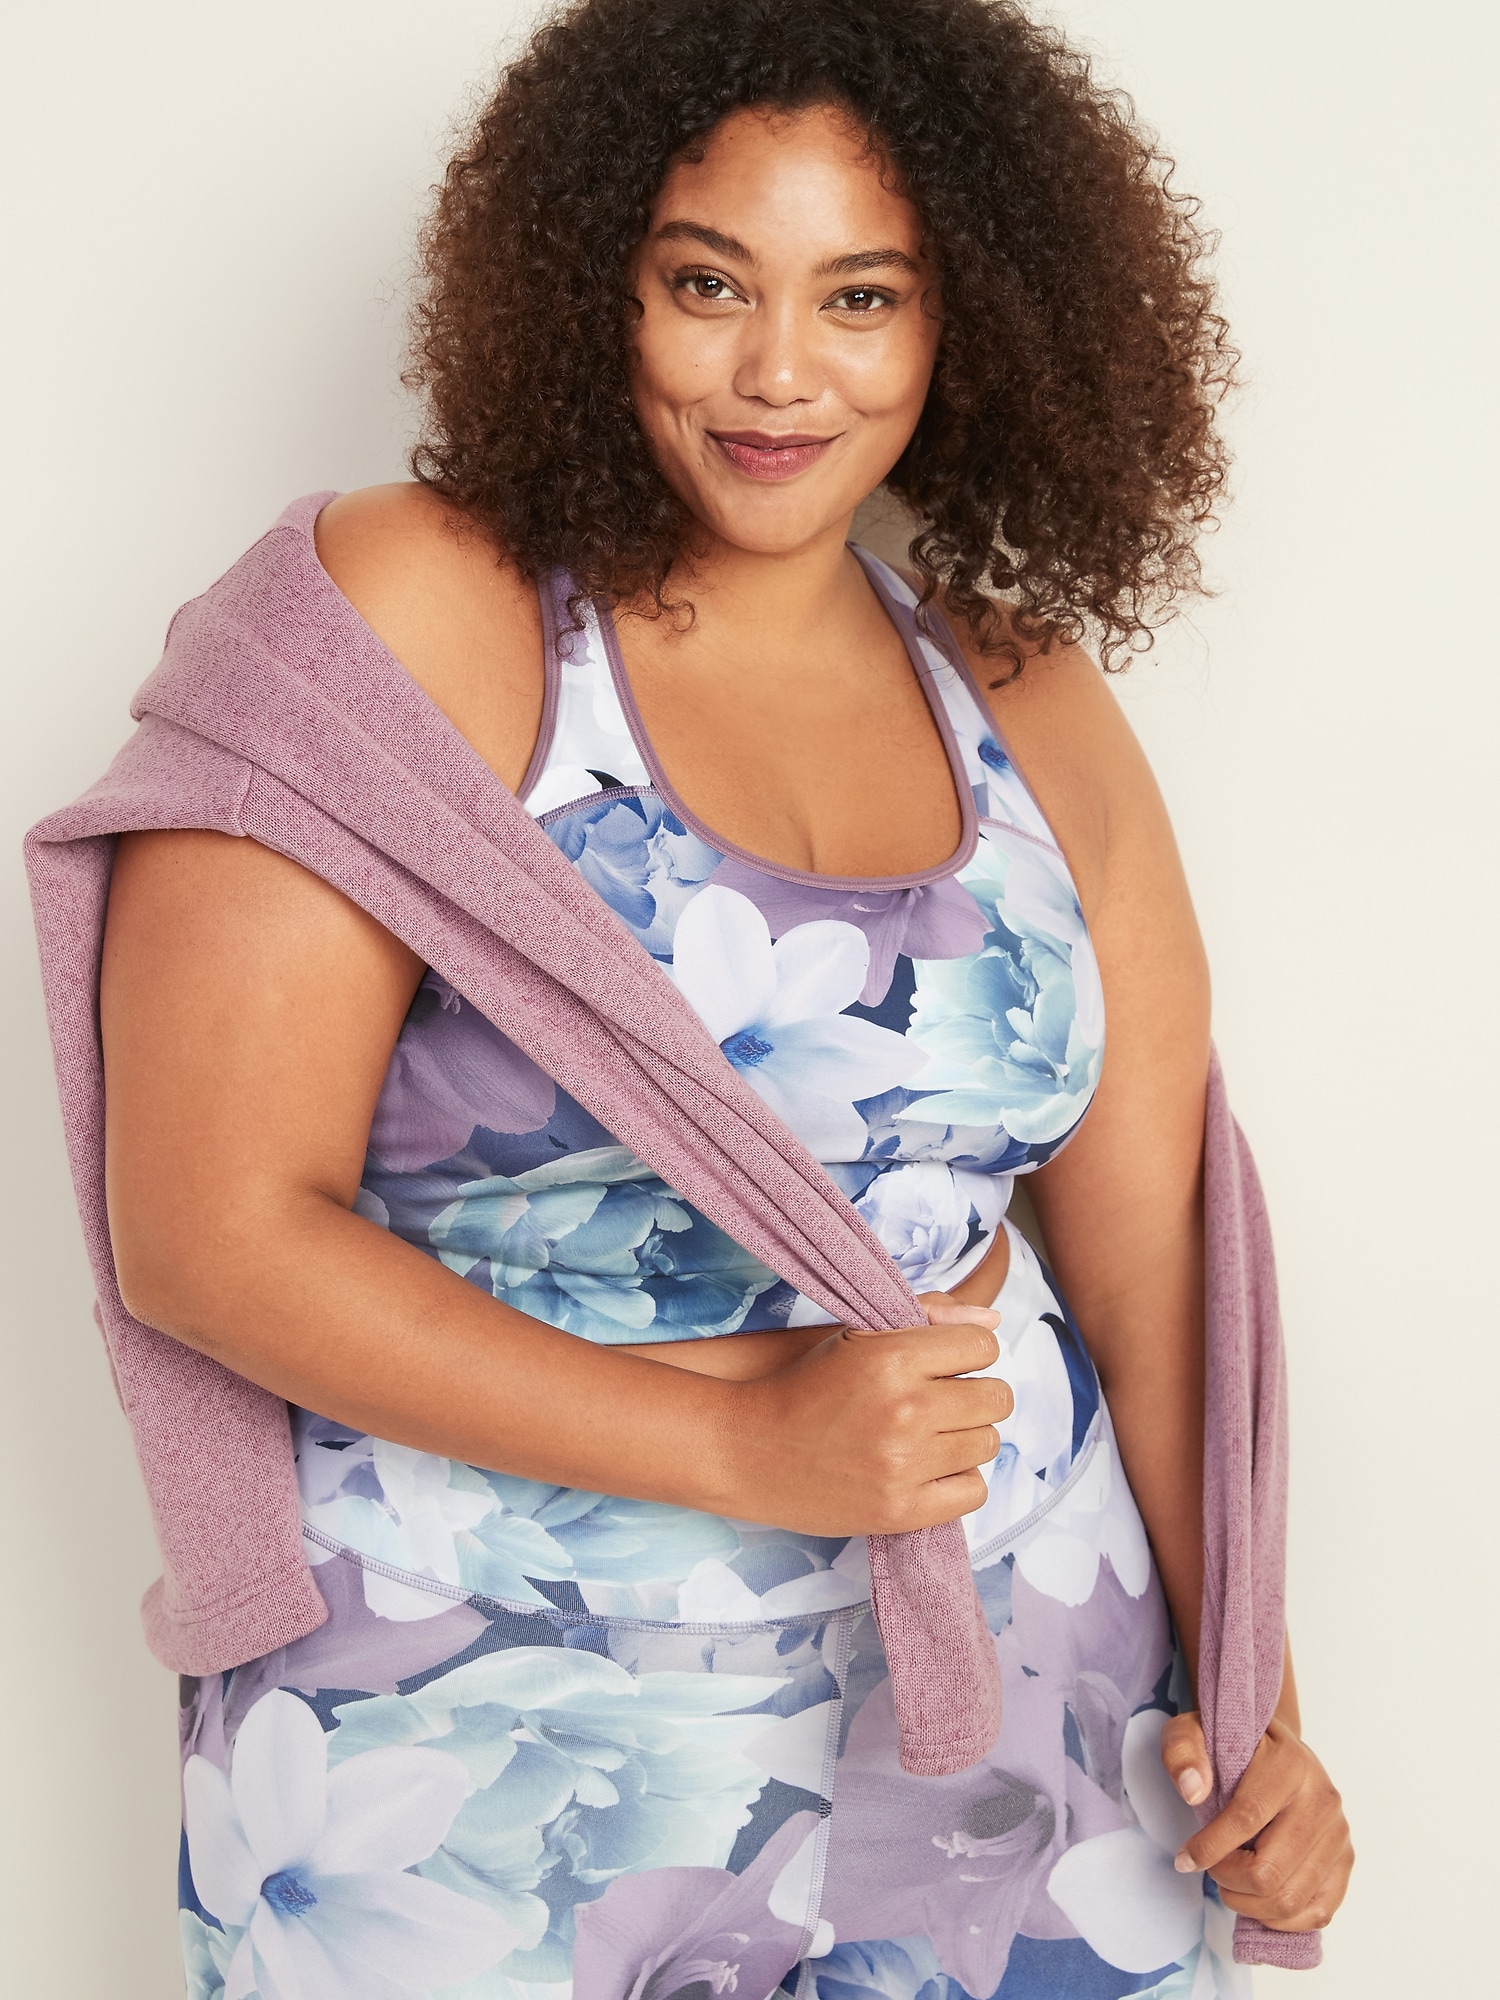 Medium Support Plus-Size Racerback Sports Bra by Old Navy - Proud Mary